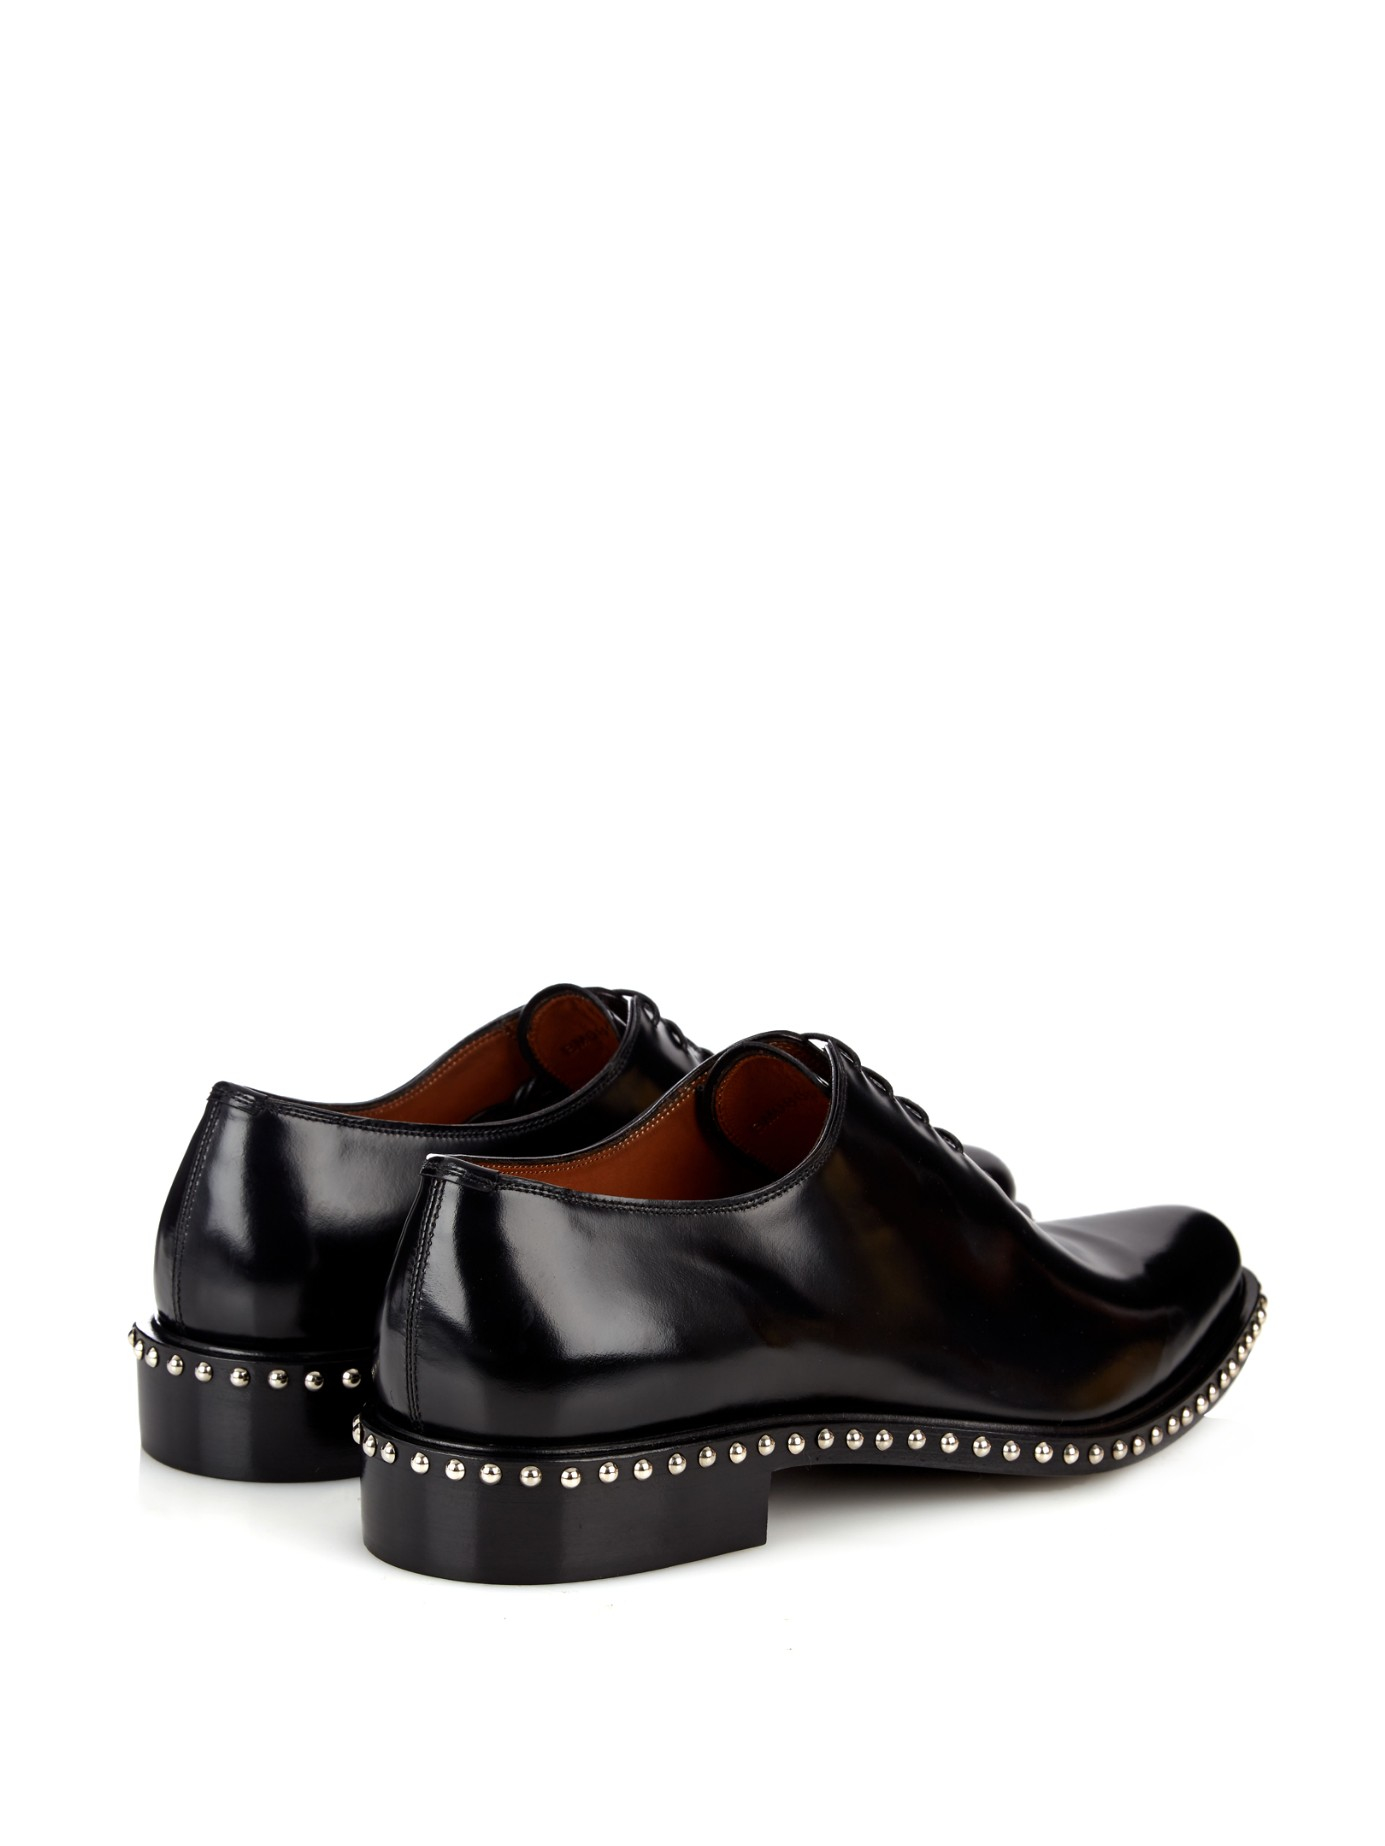 Givenchy Studded Leather Lace-Up Derby 